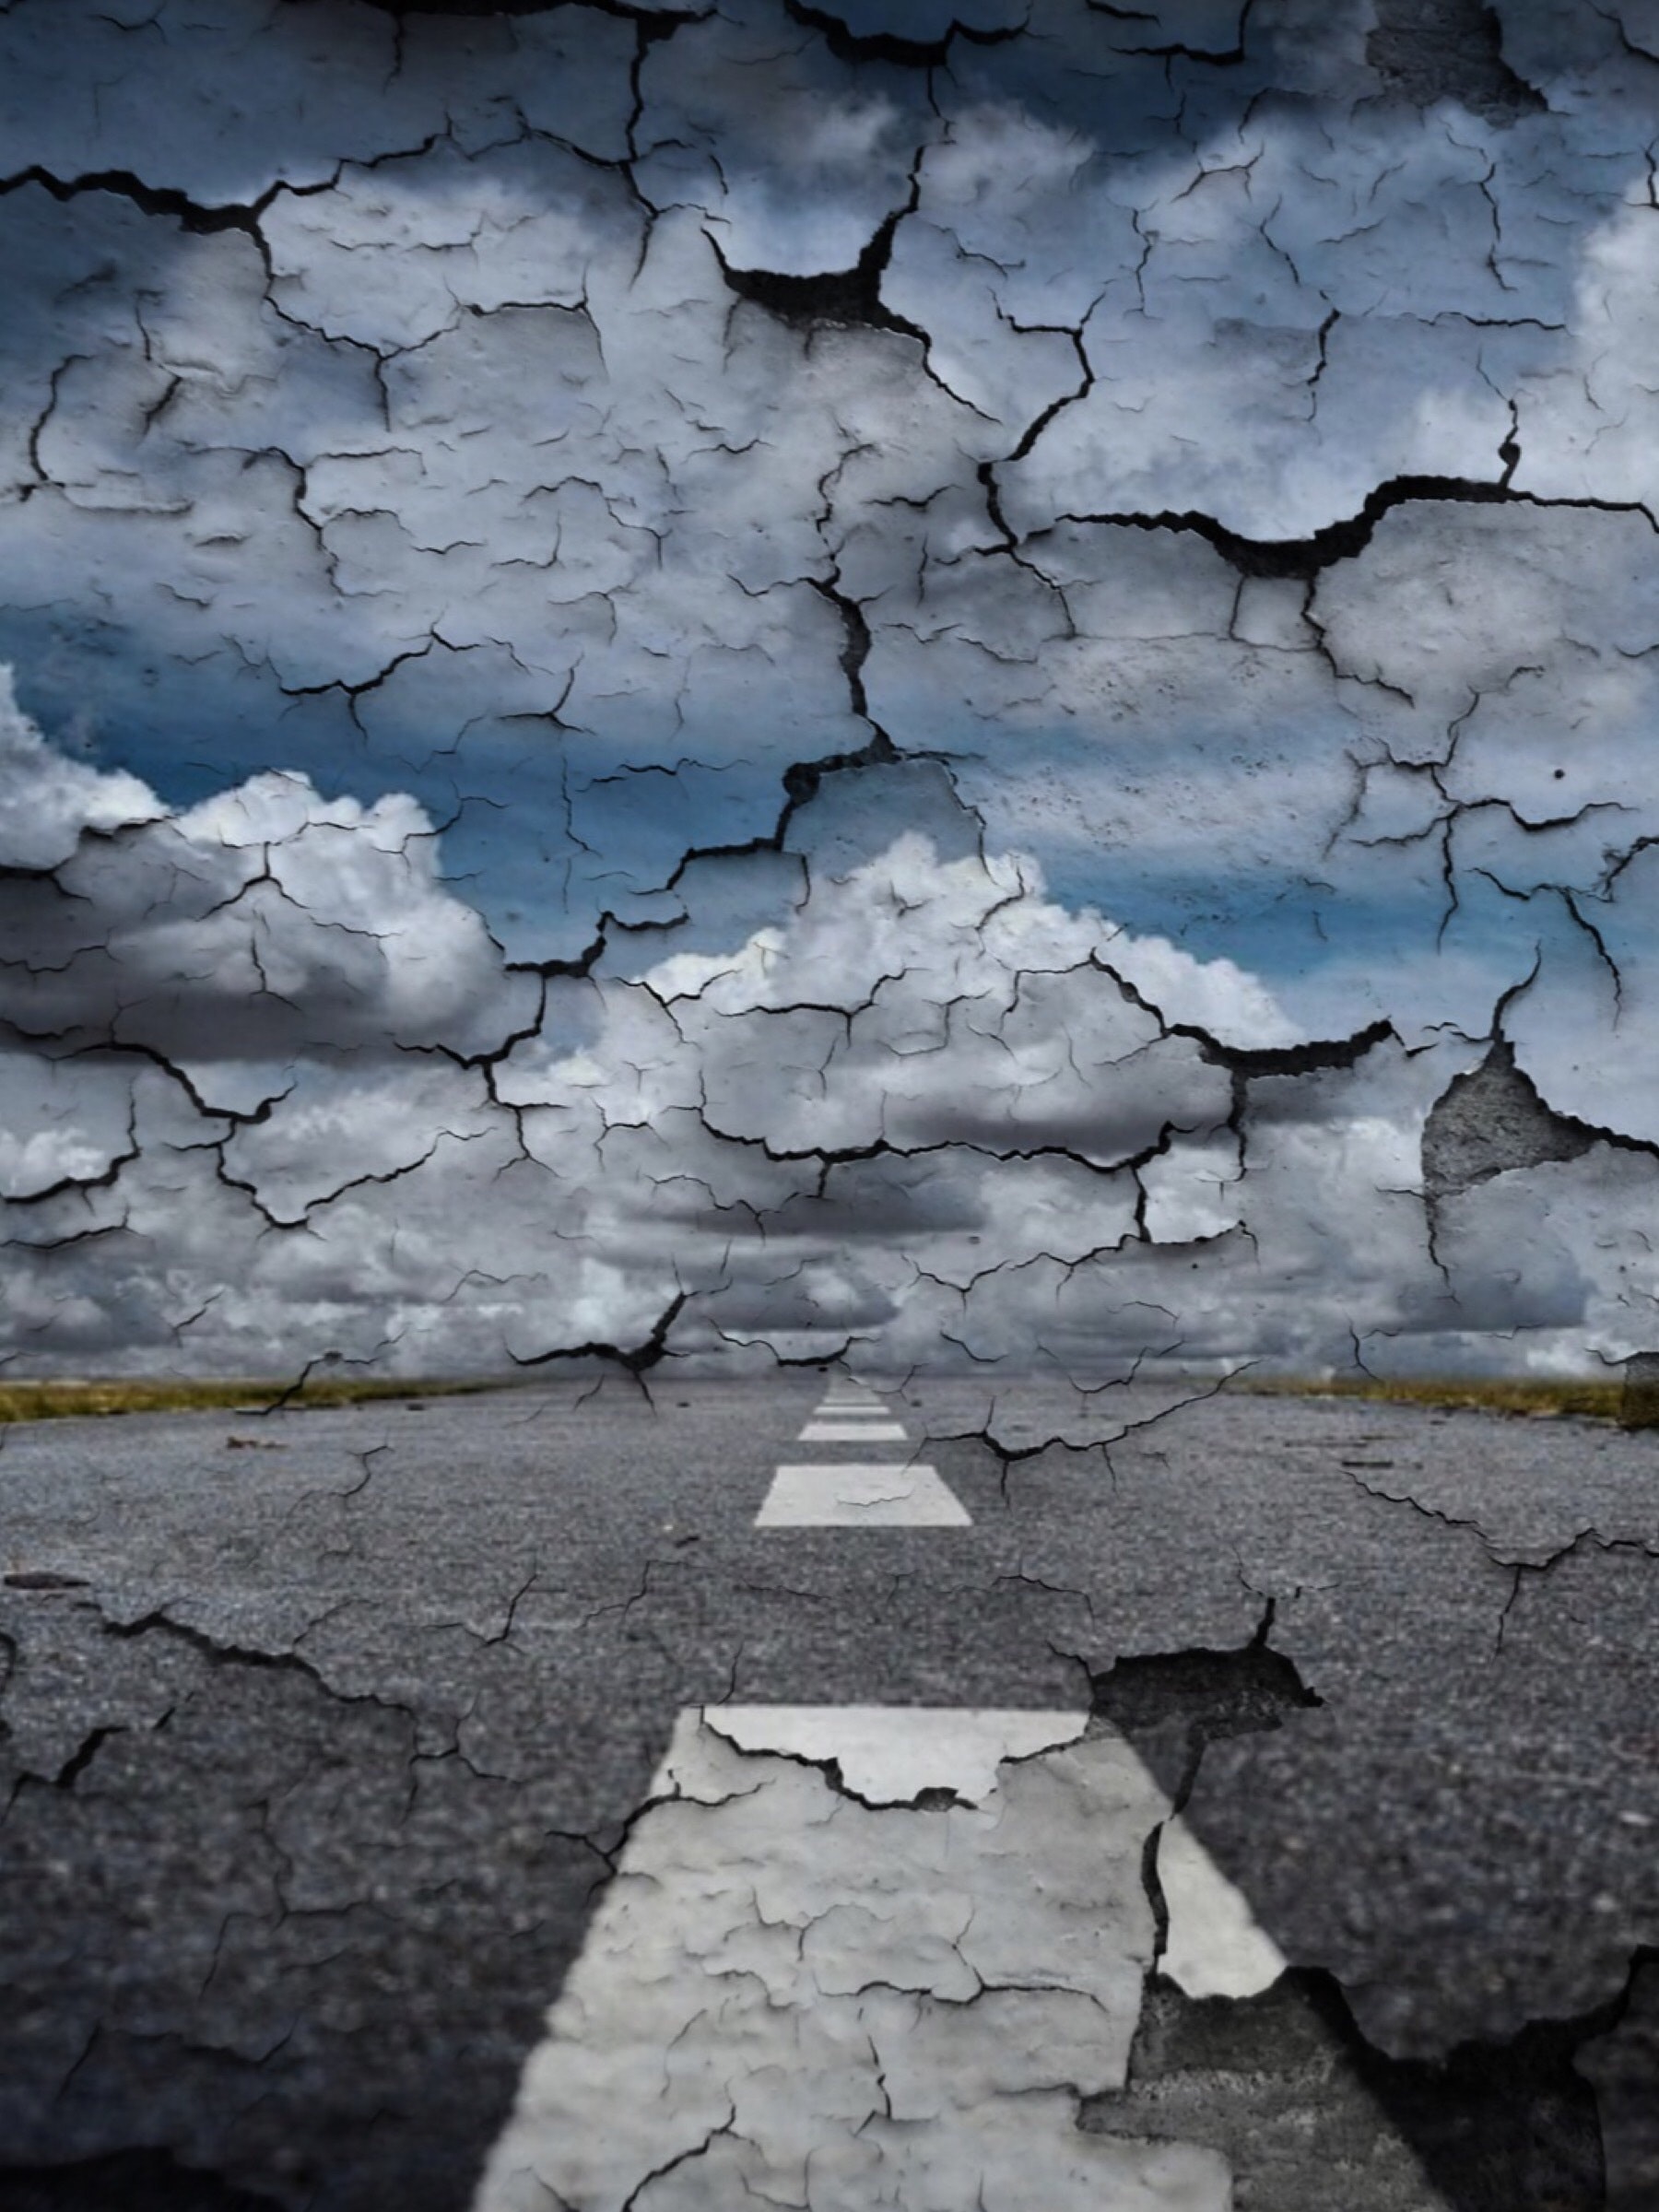 Grey Road Painting, Asphalt, Close-up, Clouds, Cracked, HQ Photo